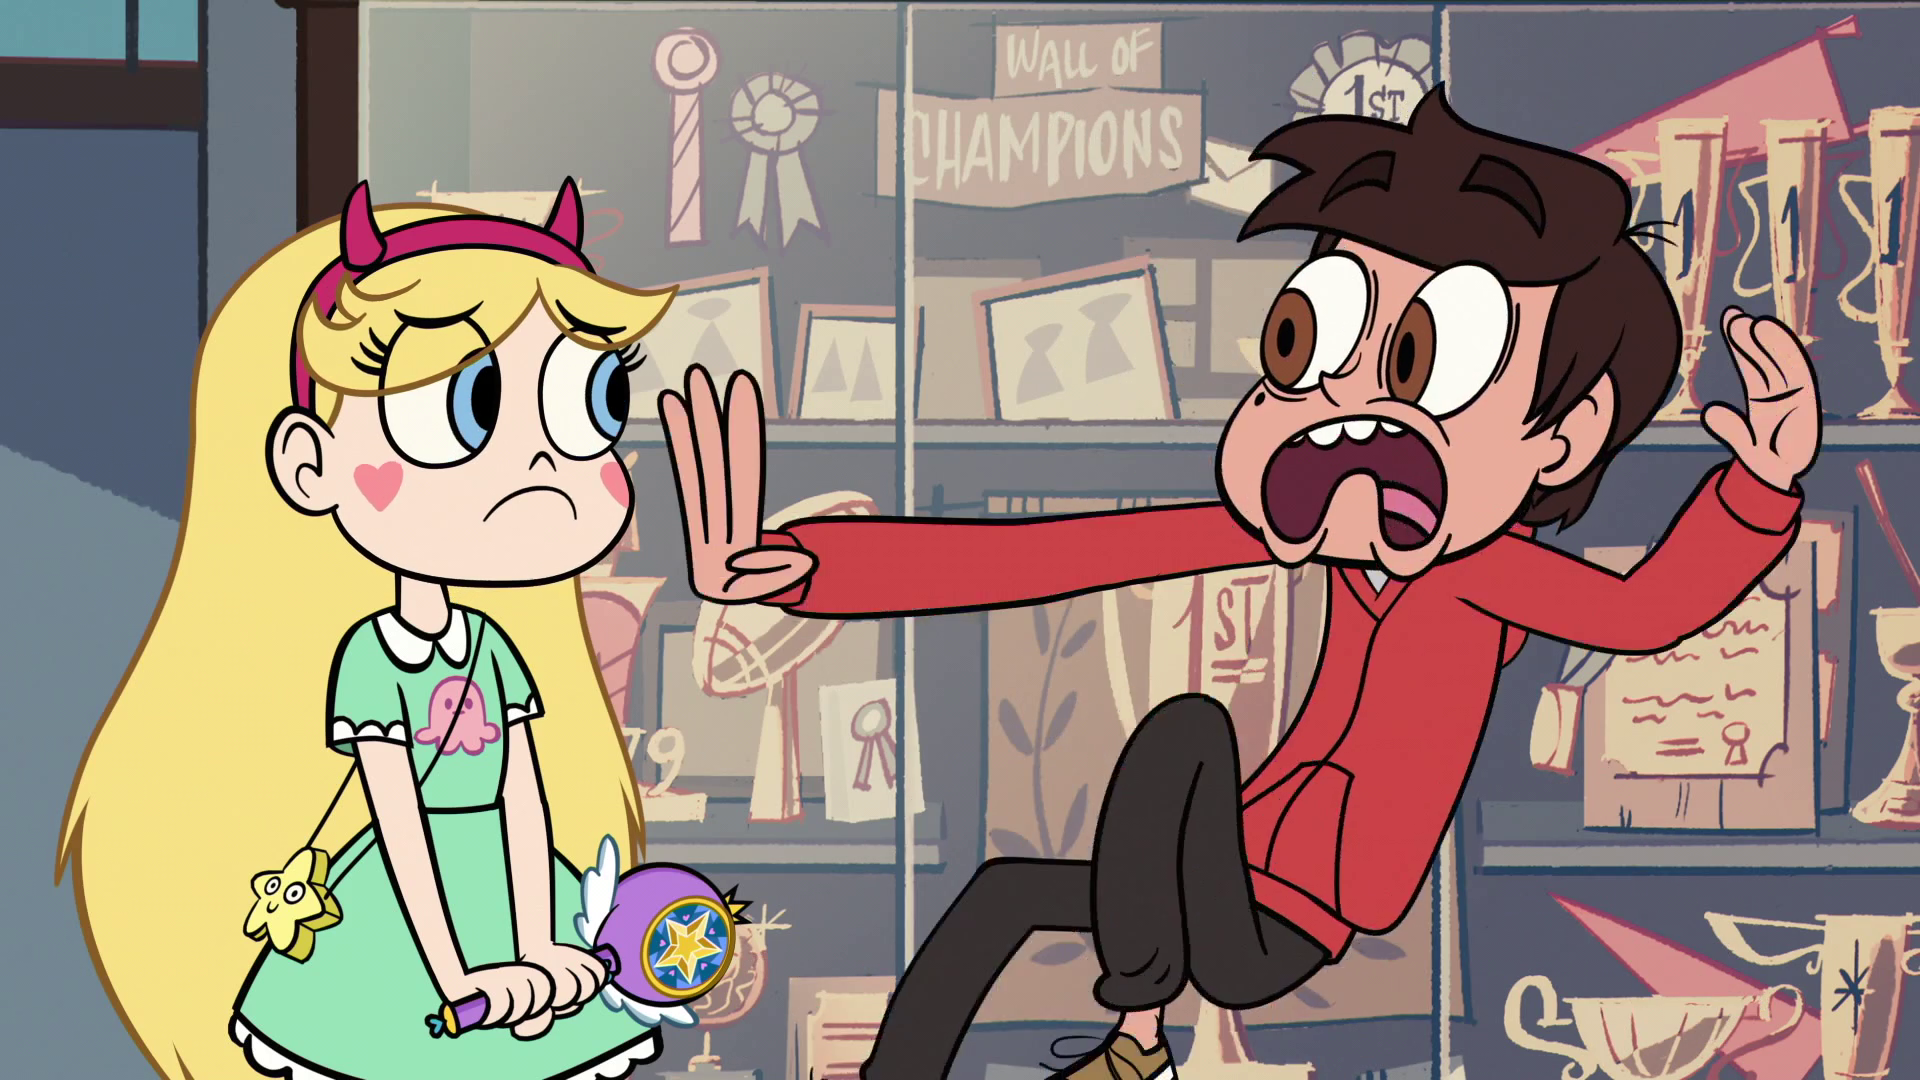 star vs the forces of evil fall fall fall